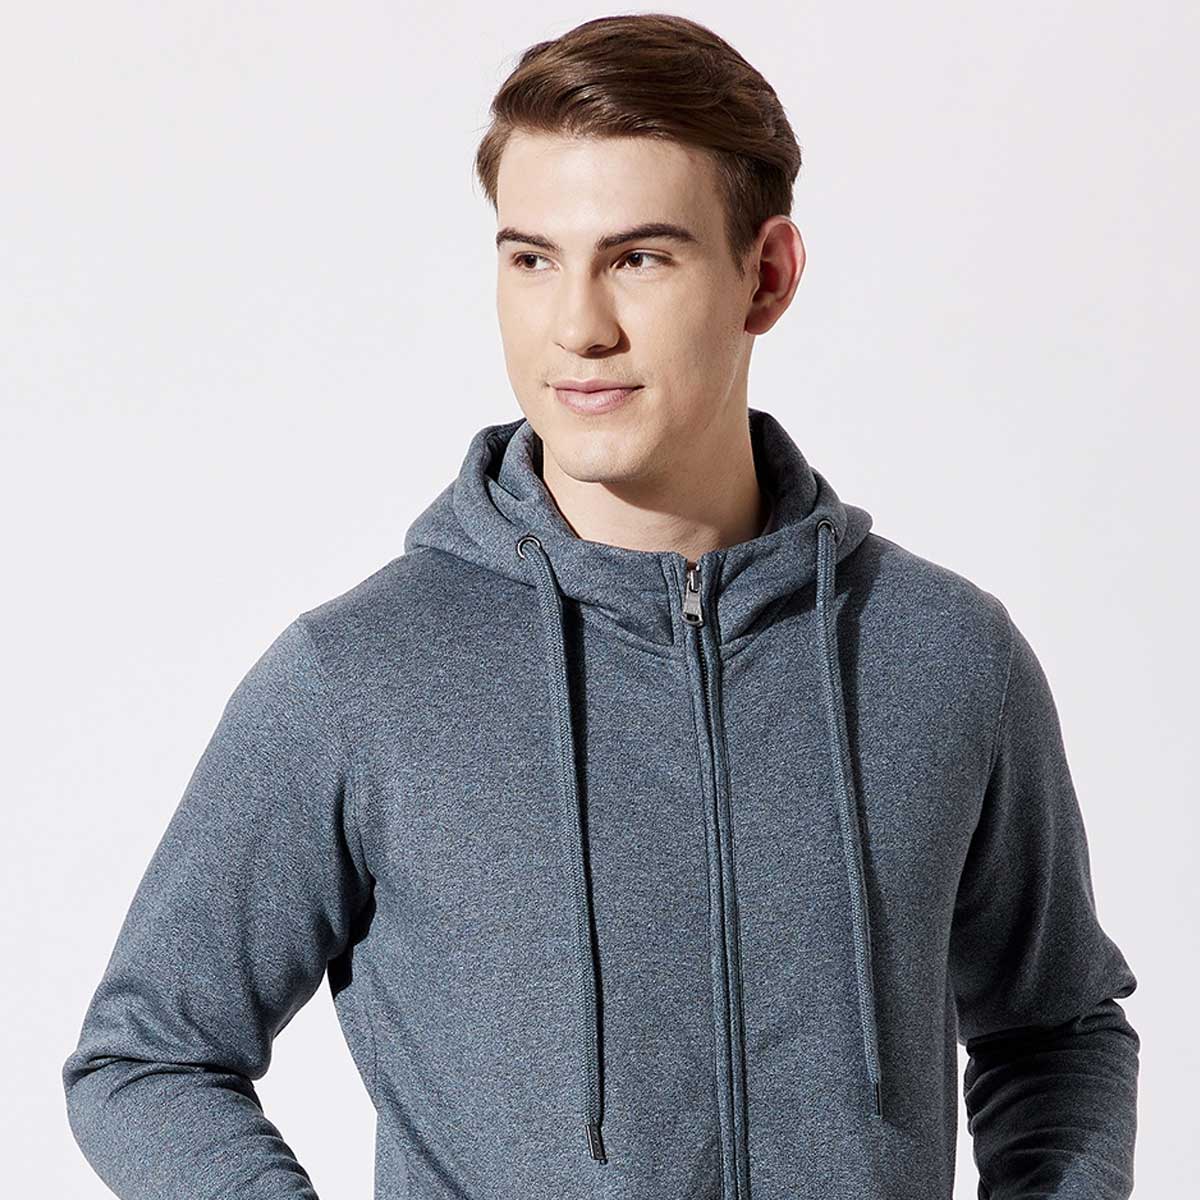 Fleece Hoodies Cut and Sew Manufacturers in Kostroma